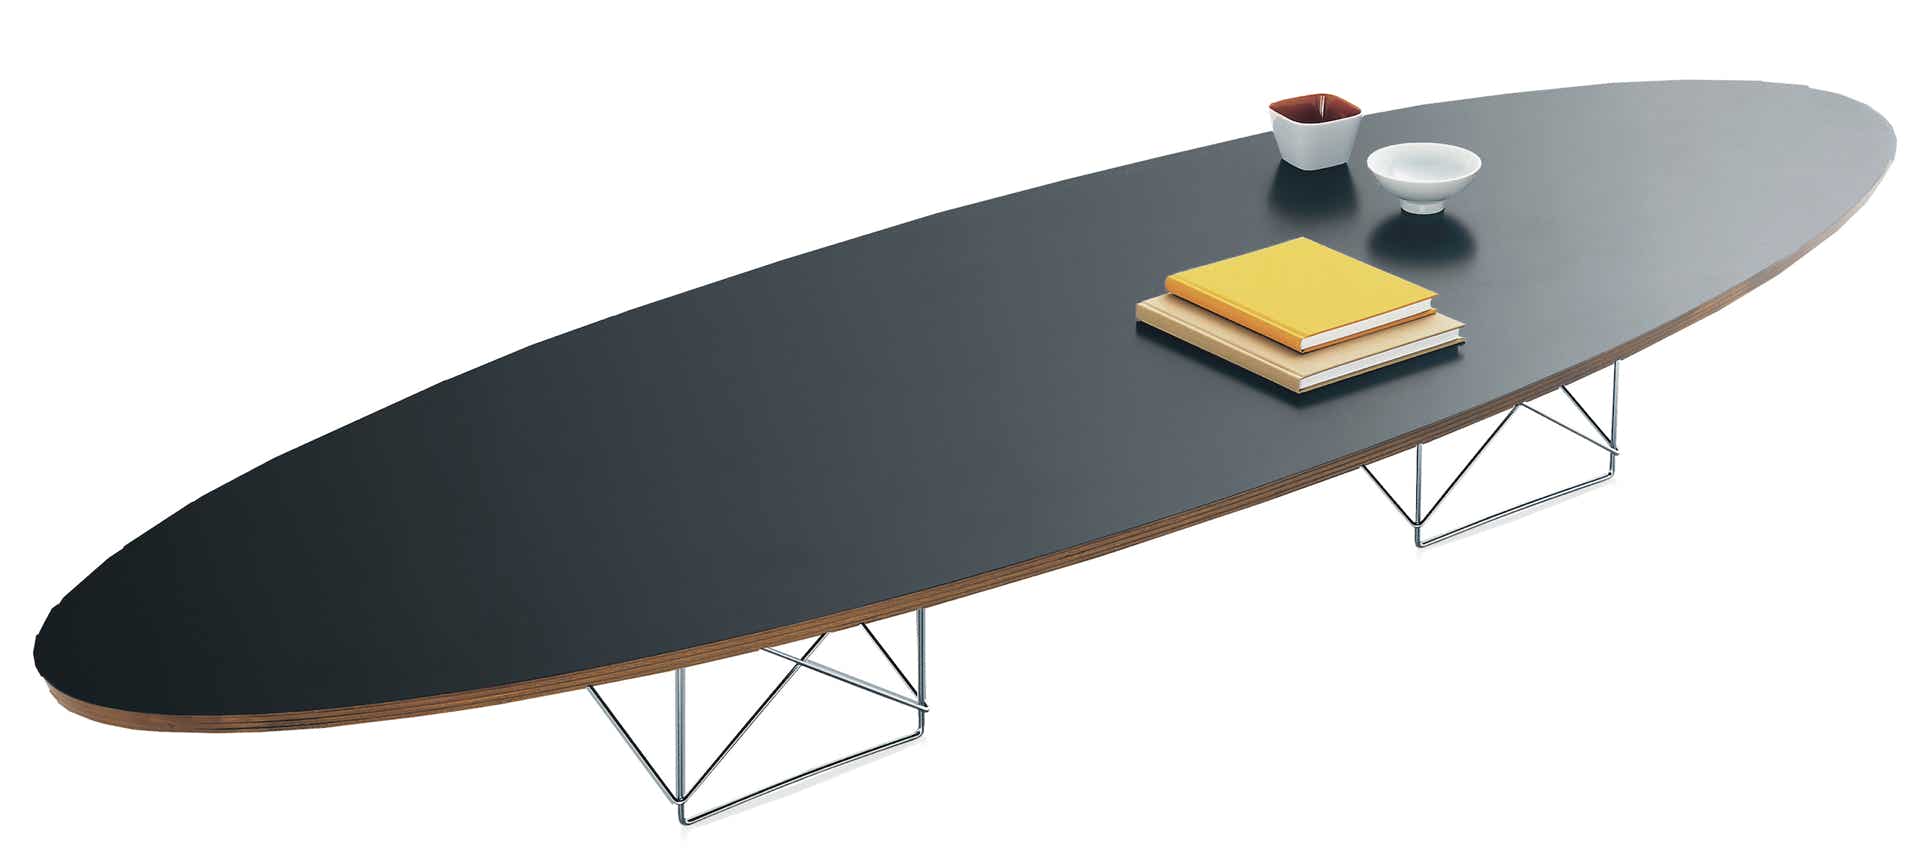 Table Elliptique ETR Charles & Ray Eames, 1951